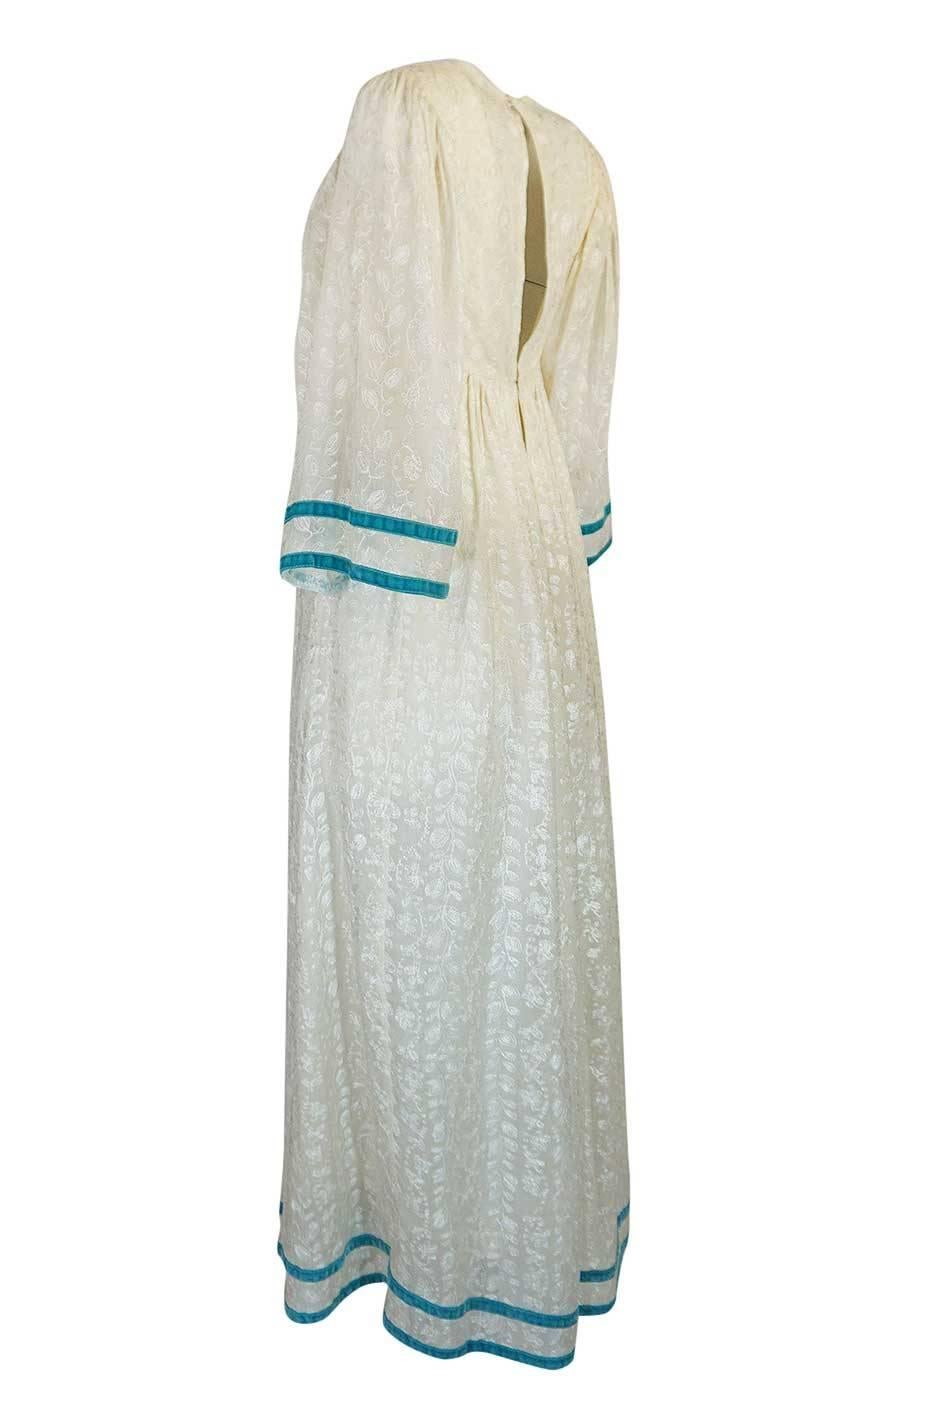 Women's c1968 Thea Porter Embroidered Ivory & Brocade 'Faye' Dress